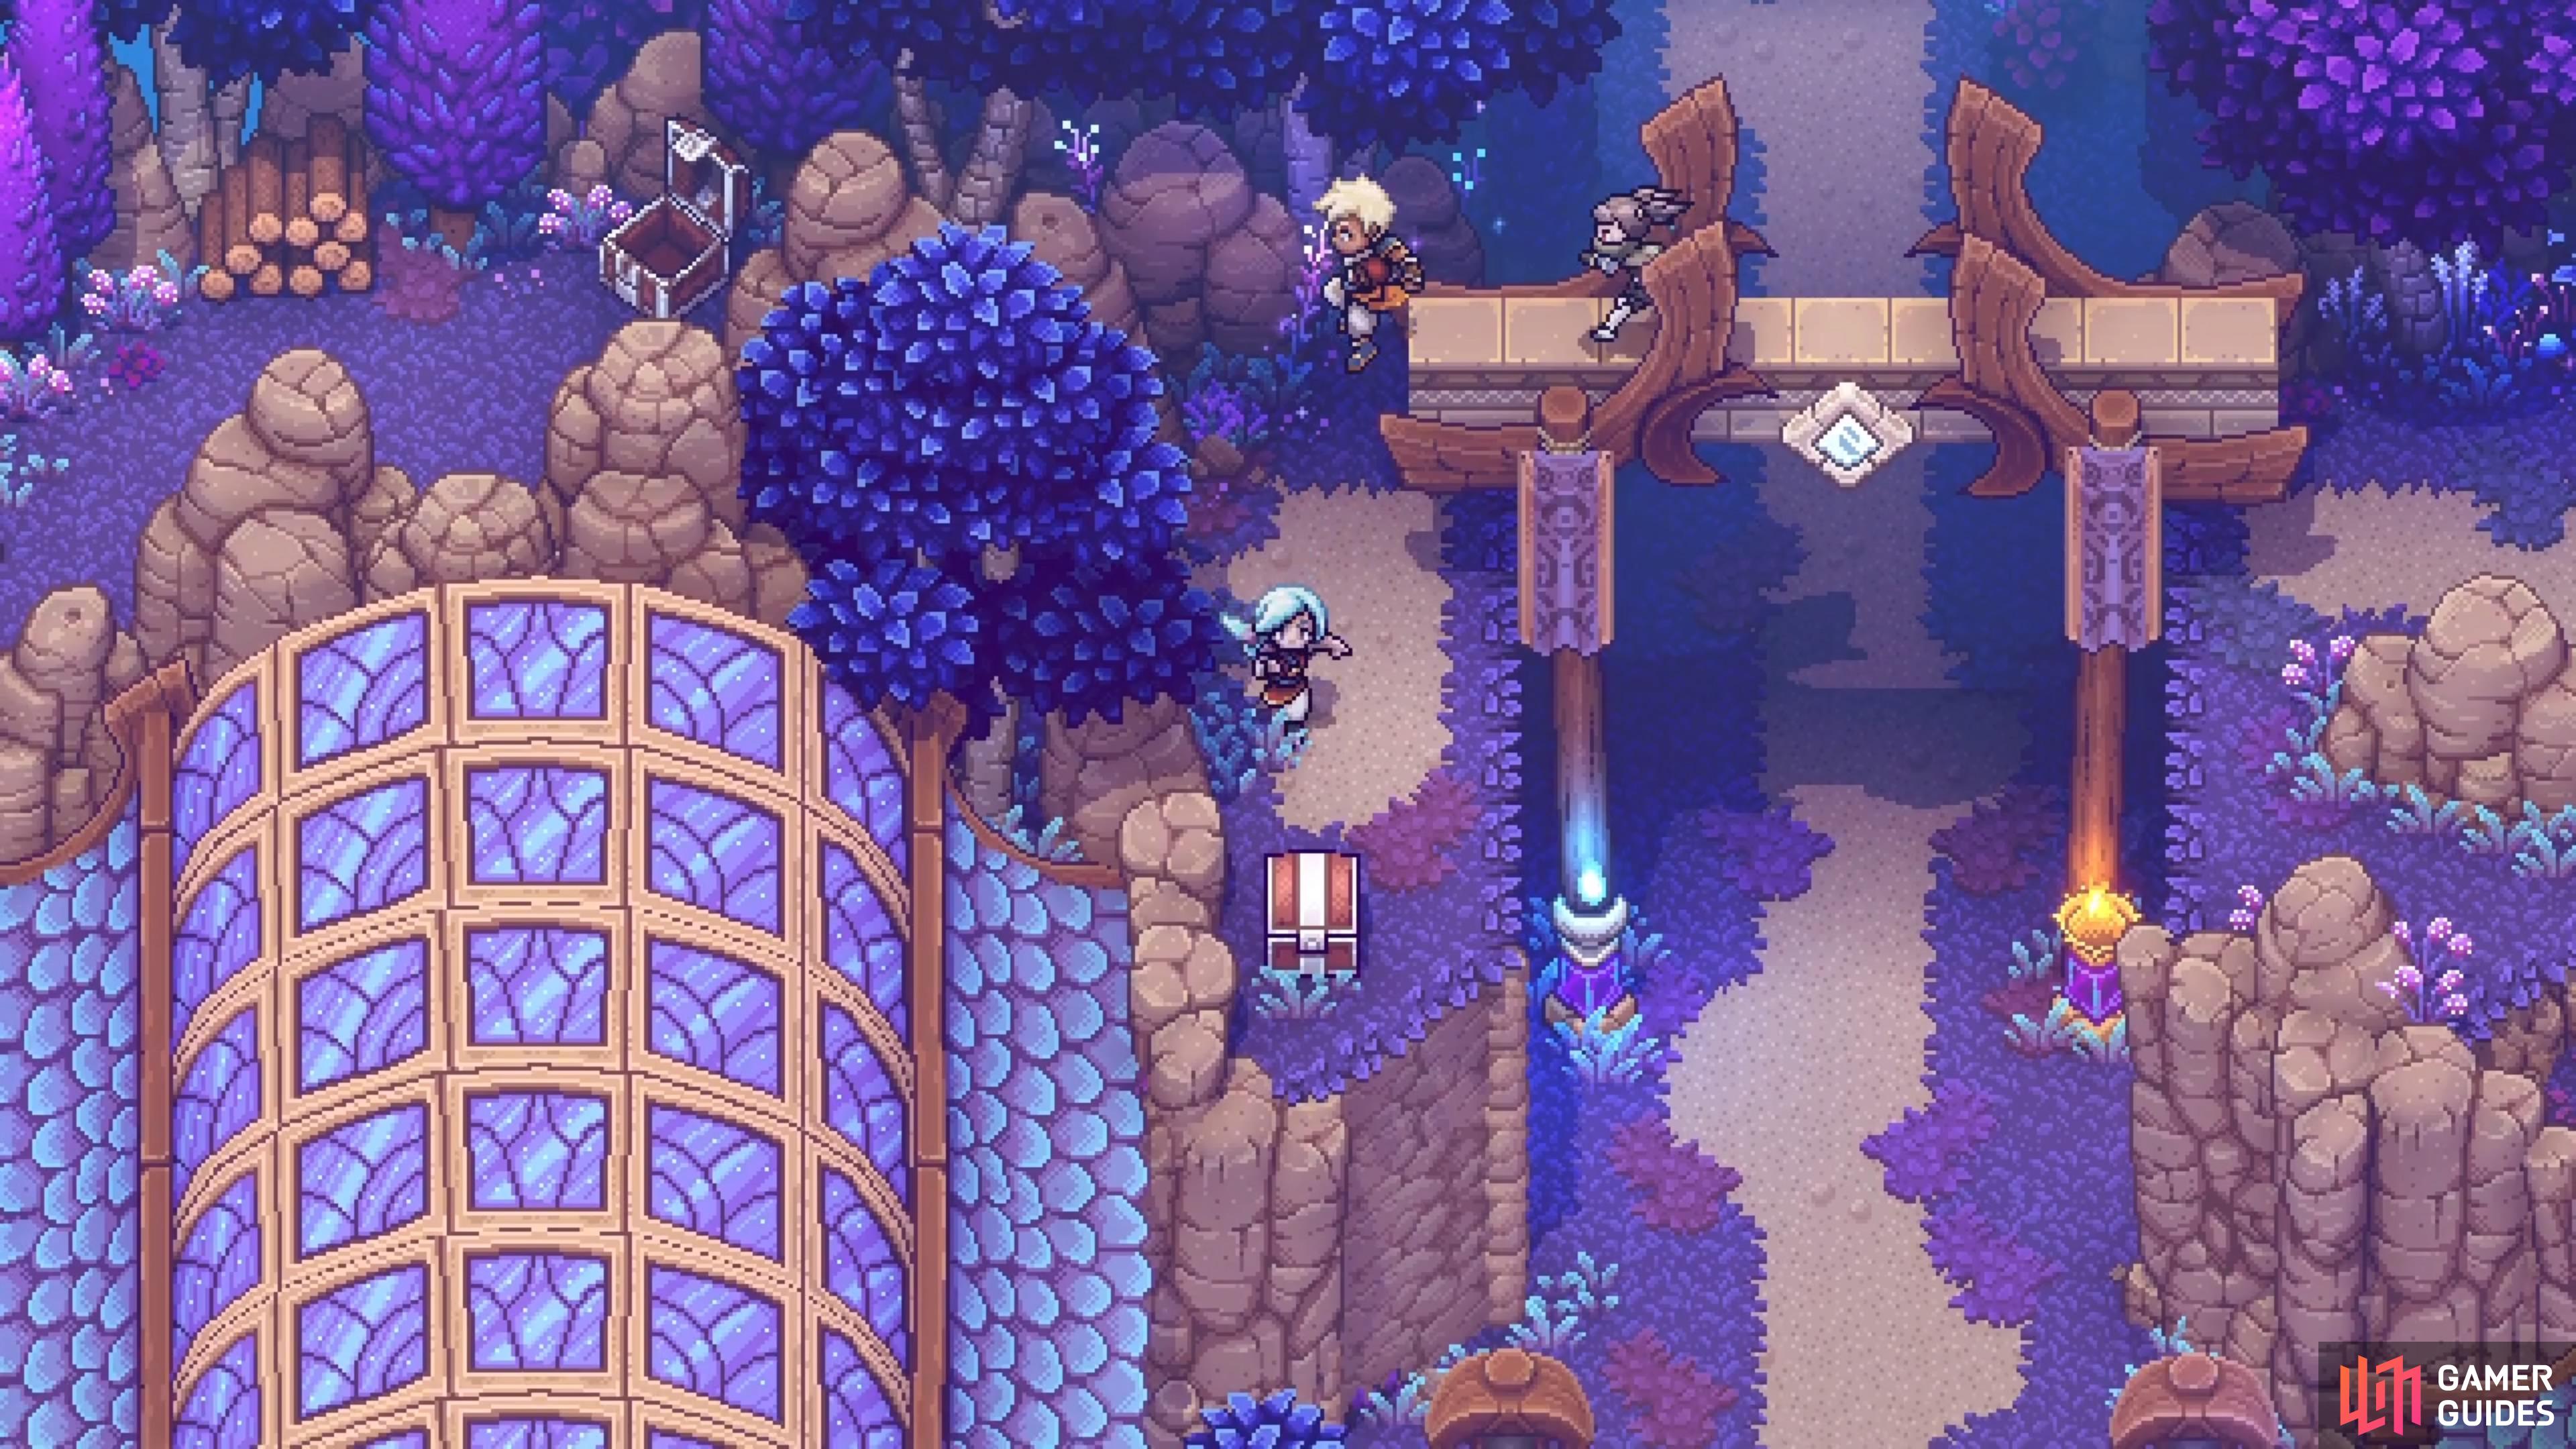 Go across that gate to reach this chest, on the left side of it.